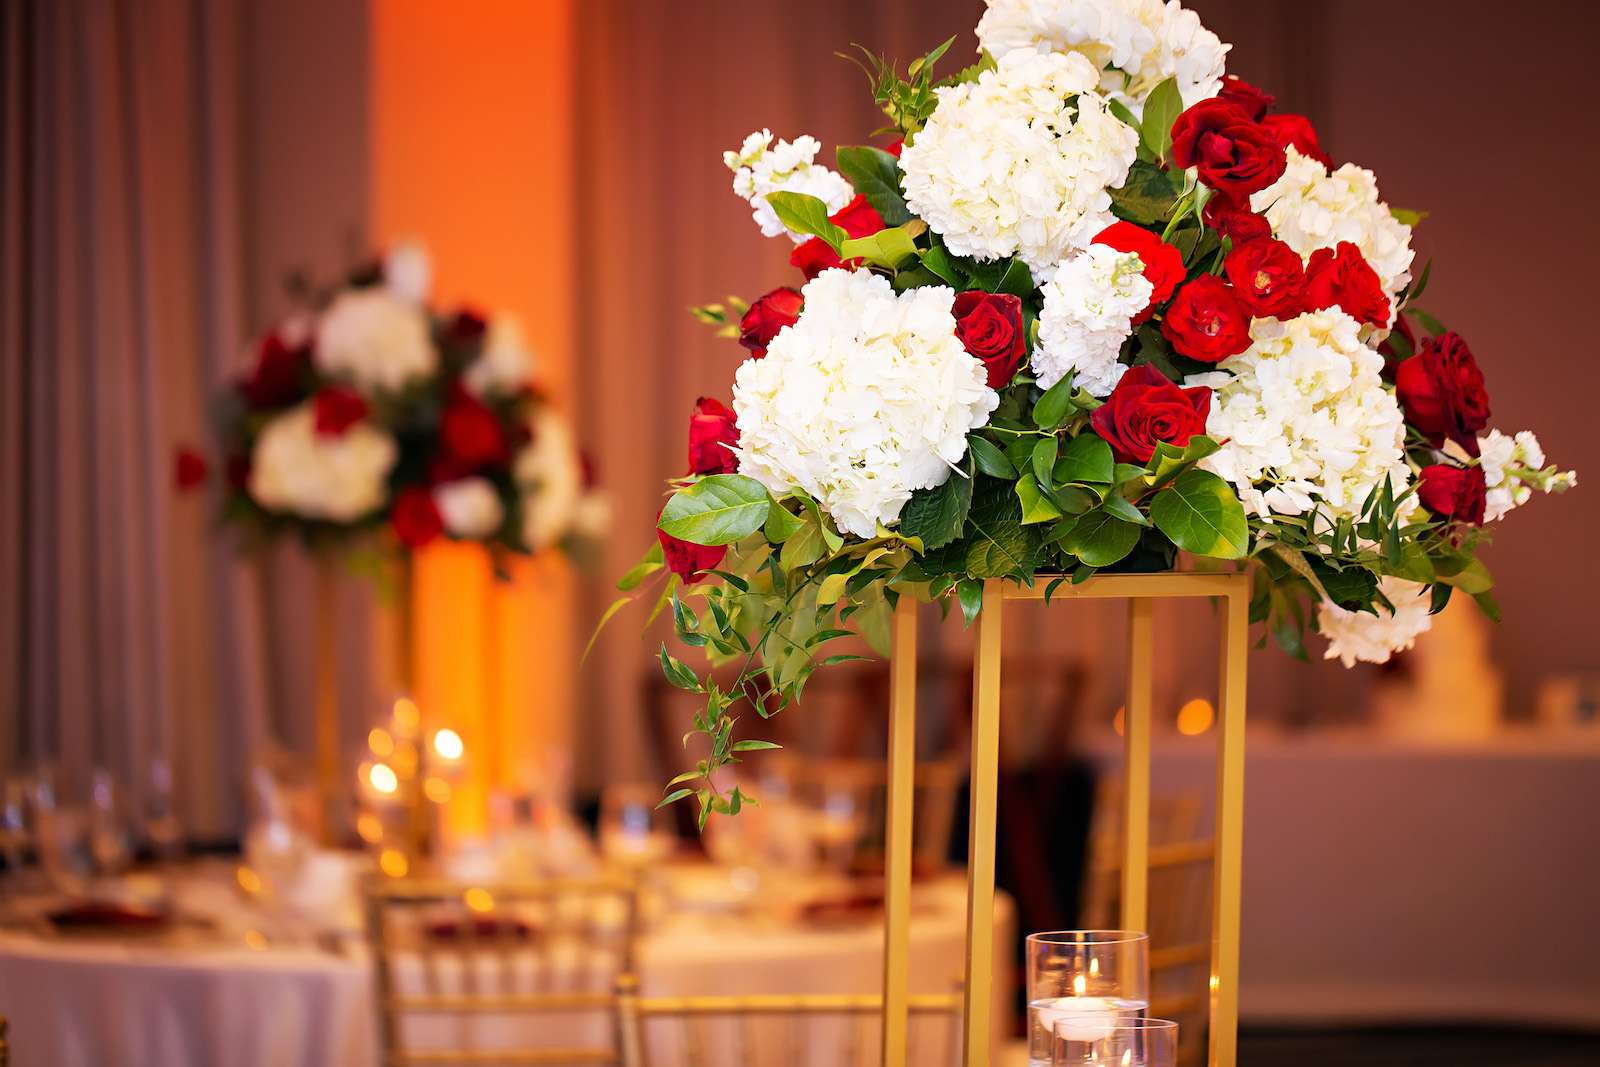 White and Red Rose Wedding Centerpieces on Gold Stands with Greenery | Florida Florist Save the Date Florida